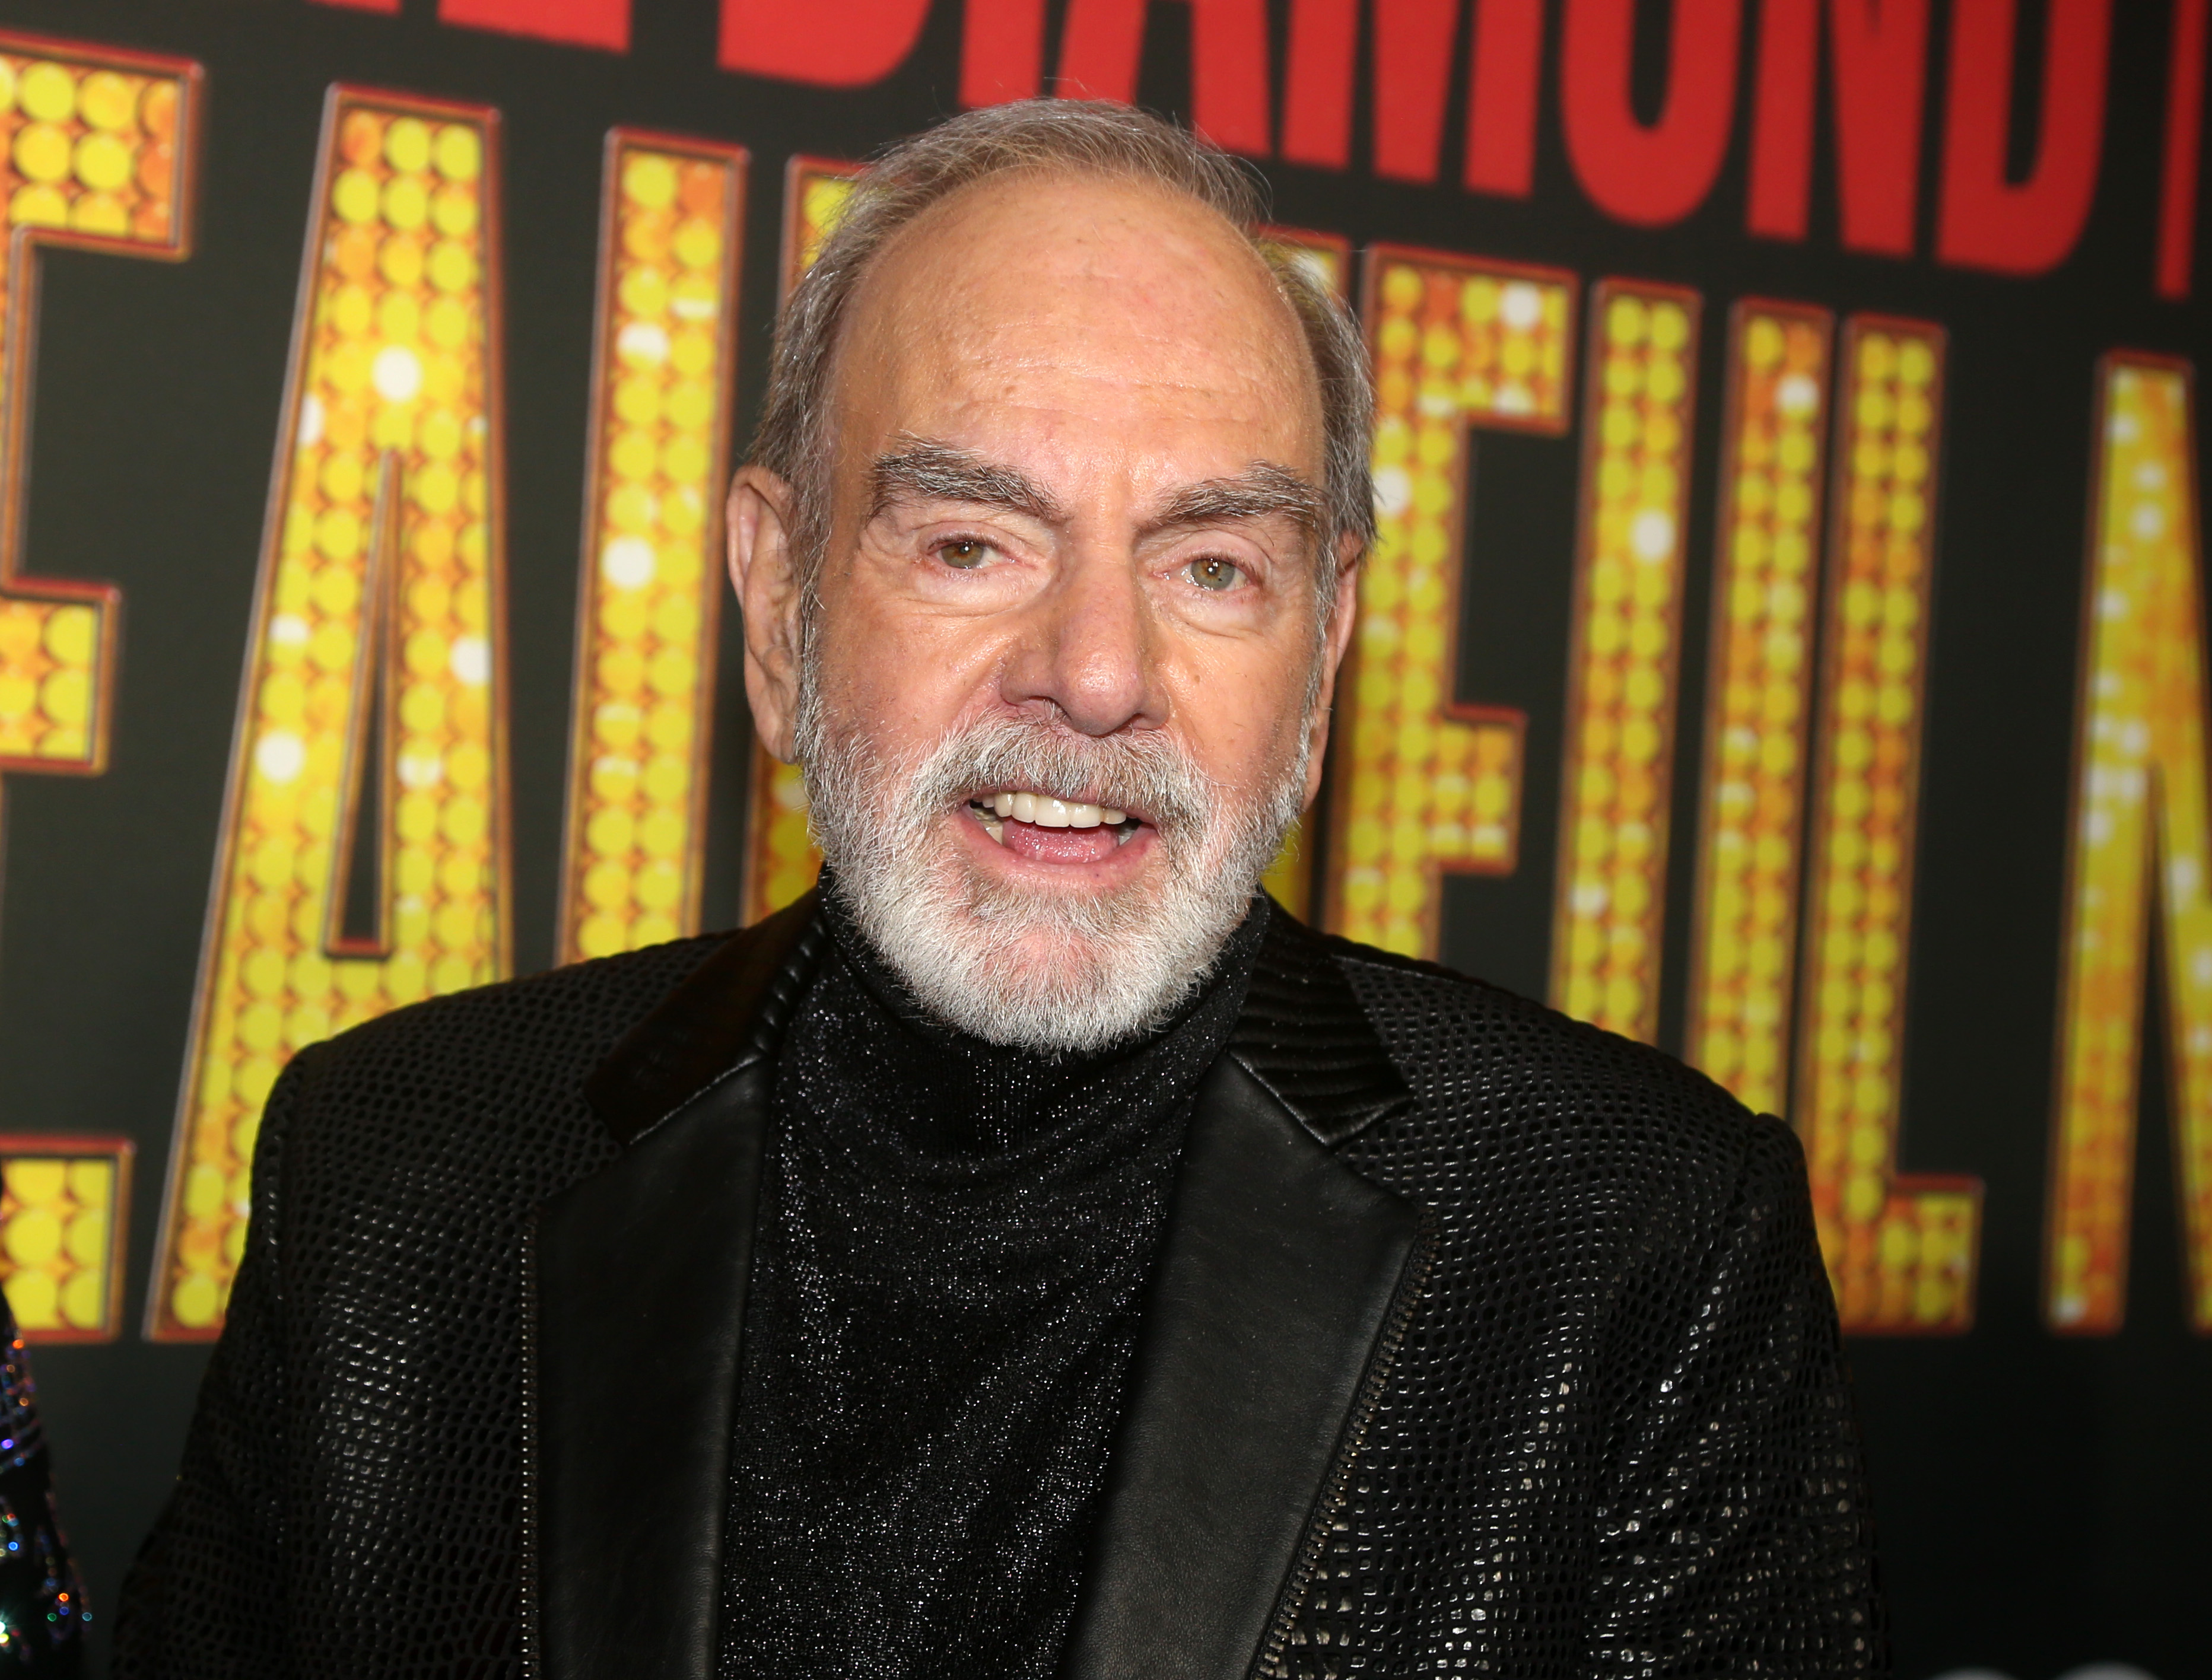 Neil Diamond poses at the opening night of the new Neil Diamond musical "A Beautiful Noise" on Broadway at The Broadhurst Theater on December 4, 2022 in New York City | Source: Getty Images